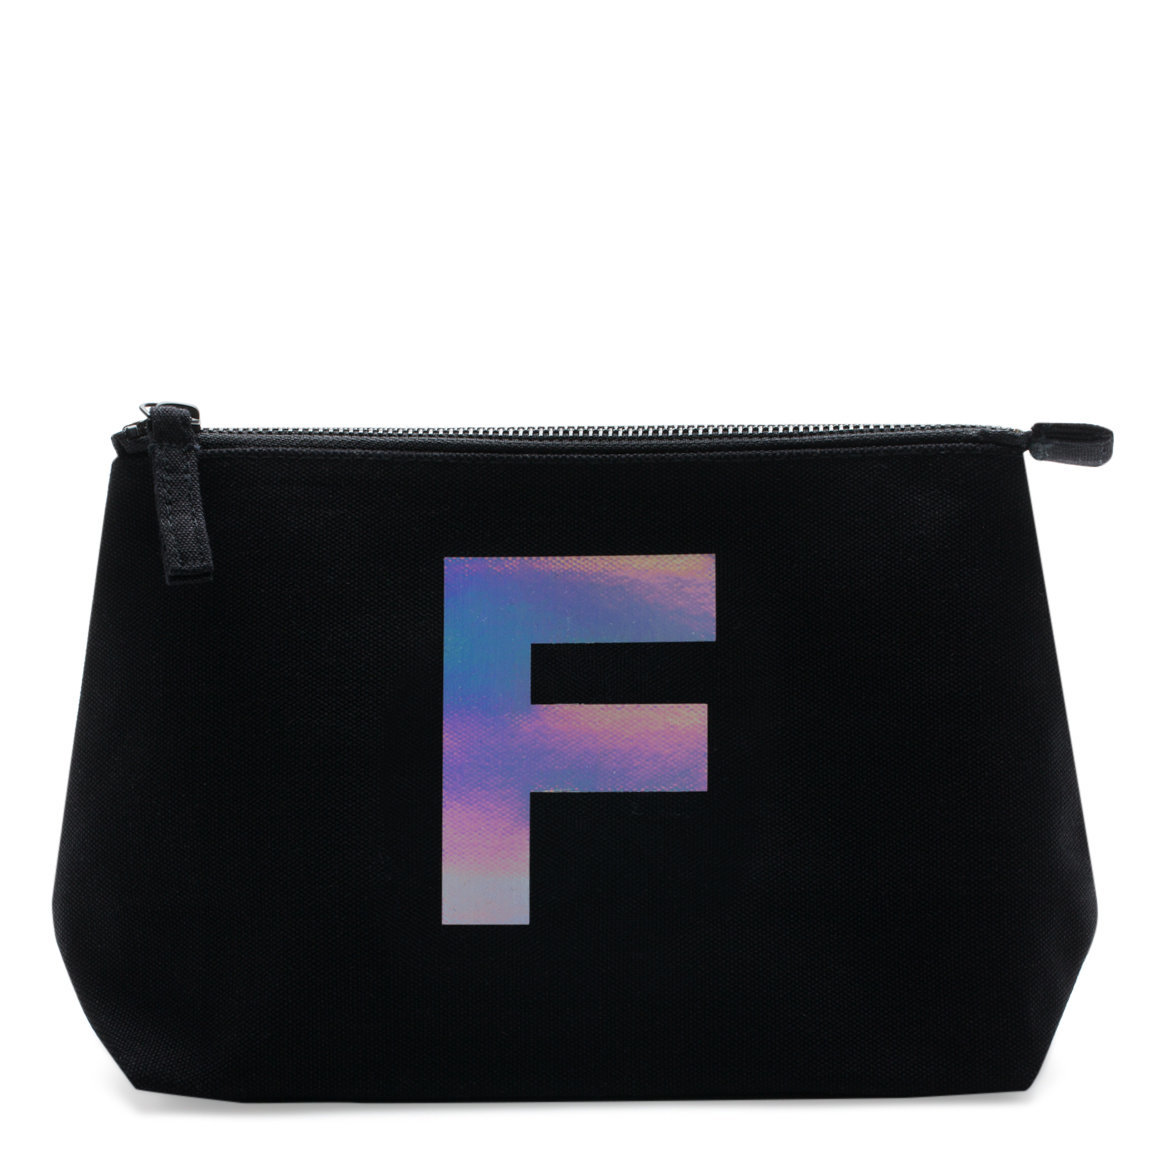 Alphabet Bags Holographic Foil Initial Makeup Bag Letter F alternative view 1 - product swatch.